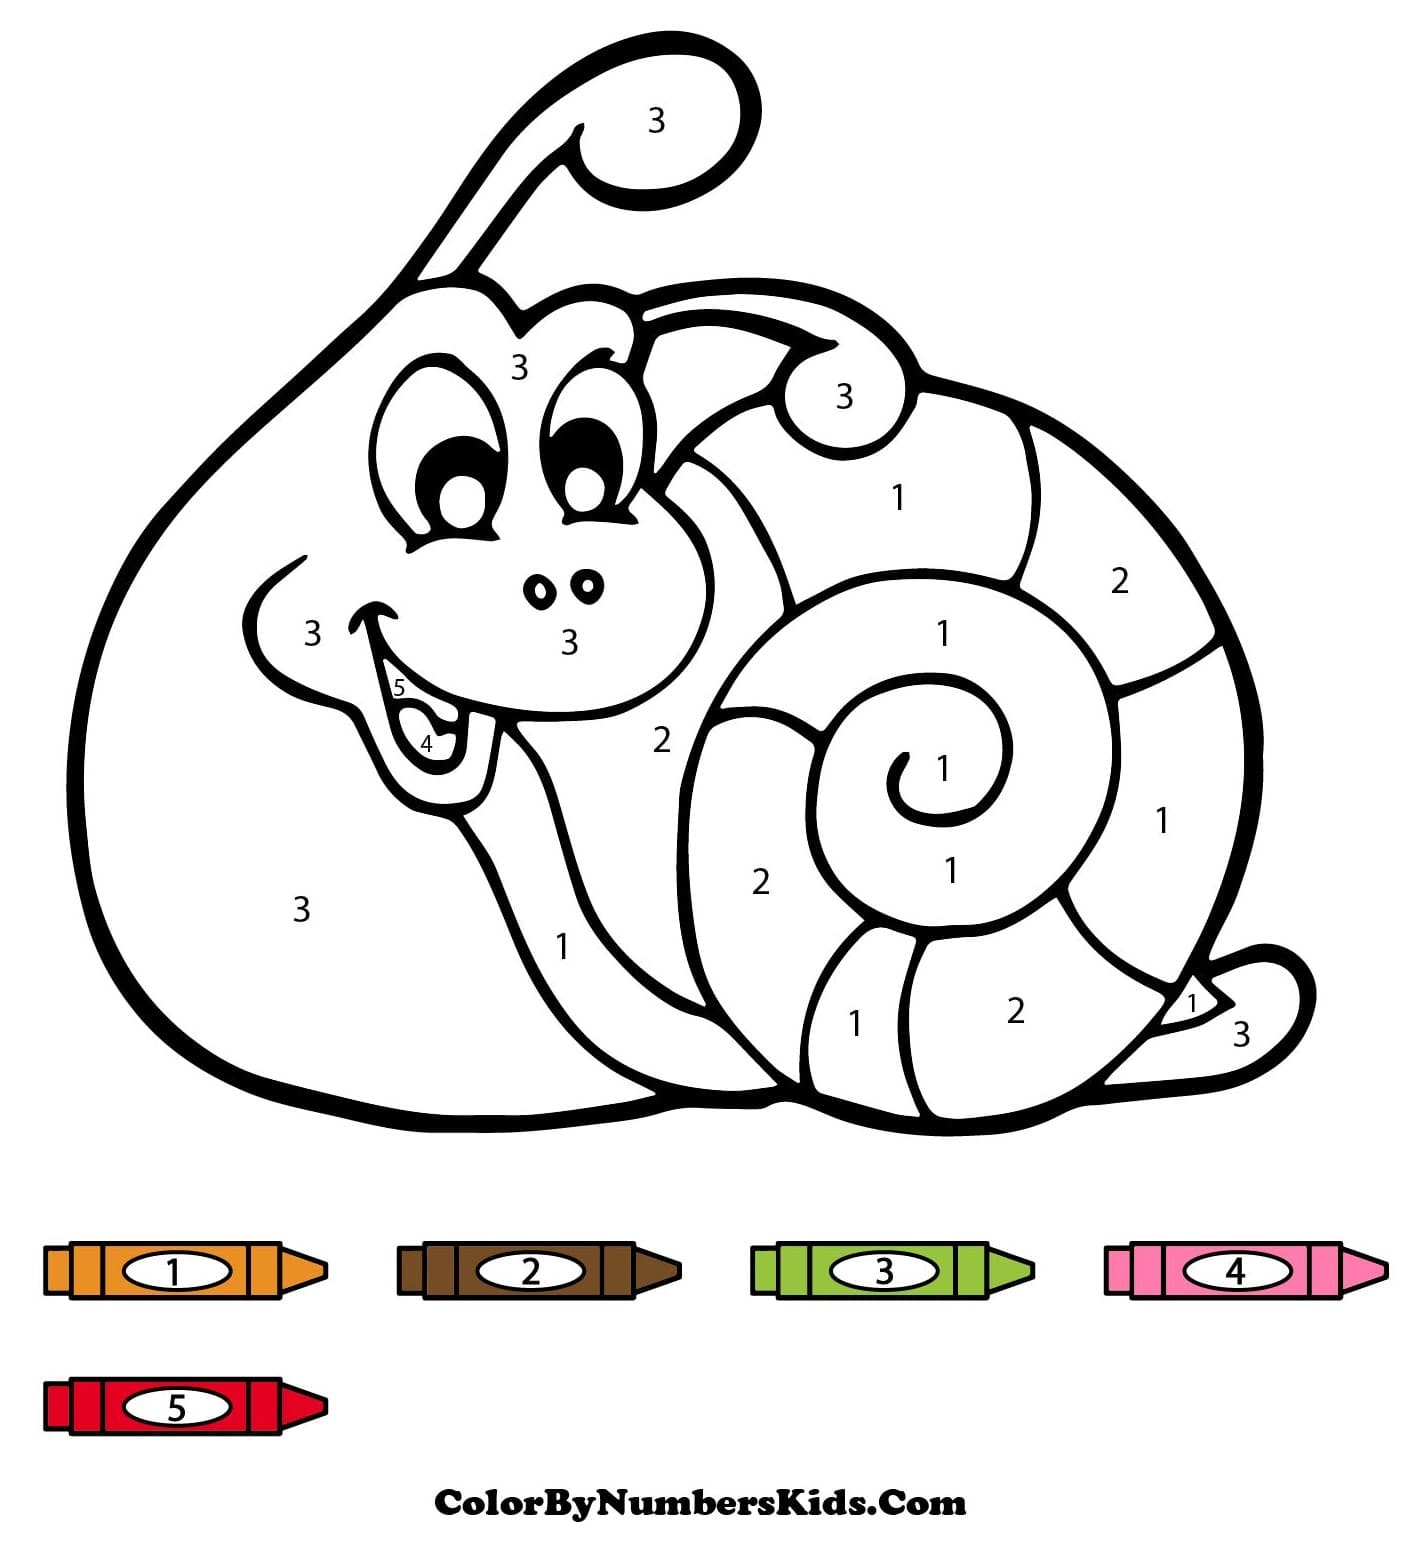 Cheerful Snail Color By Number